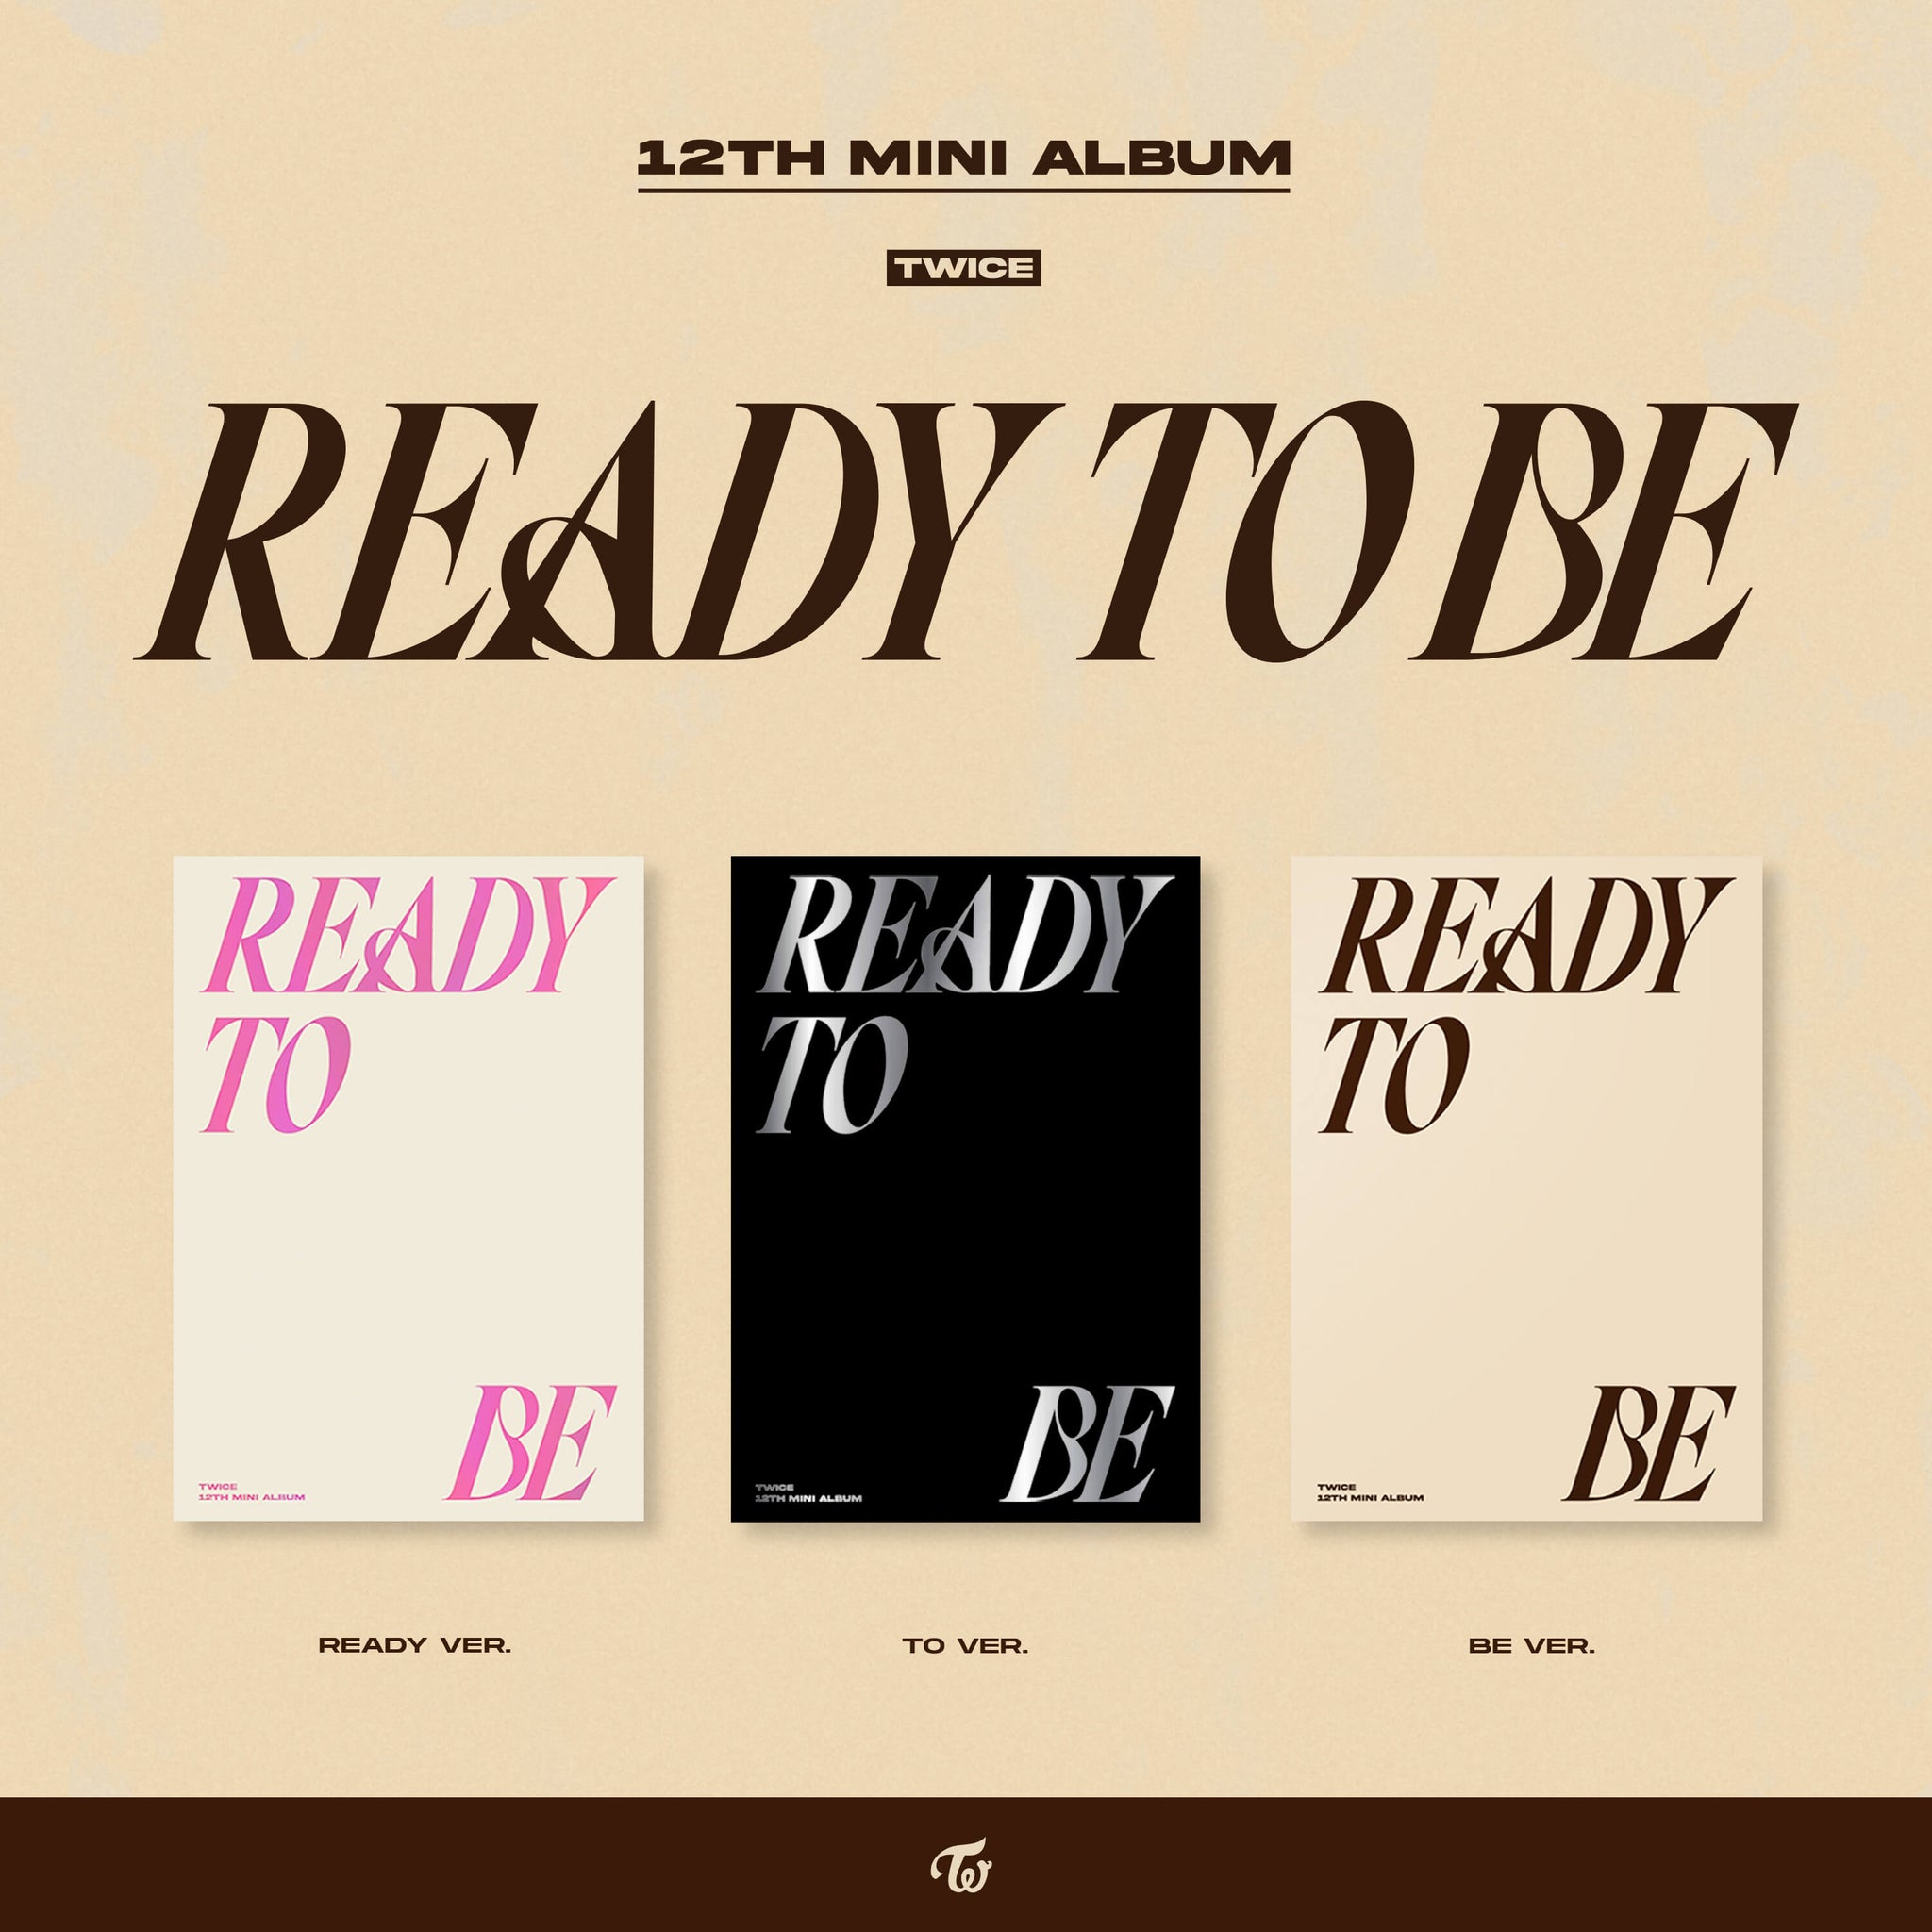 TWICE 12th Mini Album READY TO BE - READY + TO + BE Version